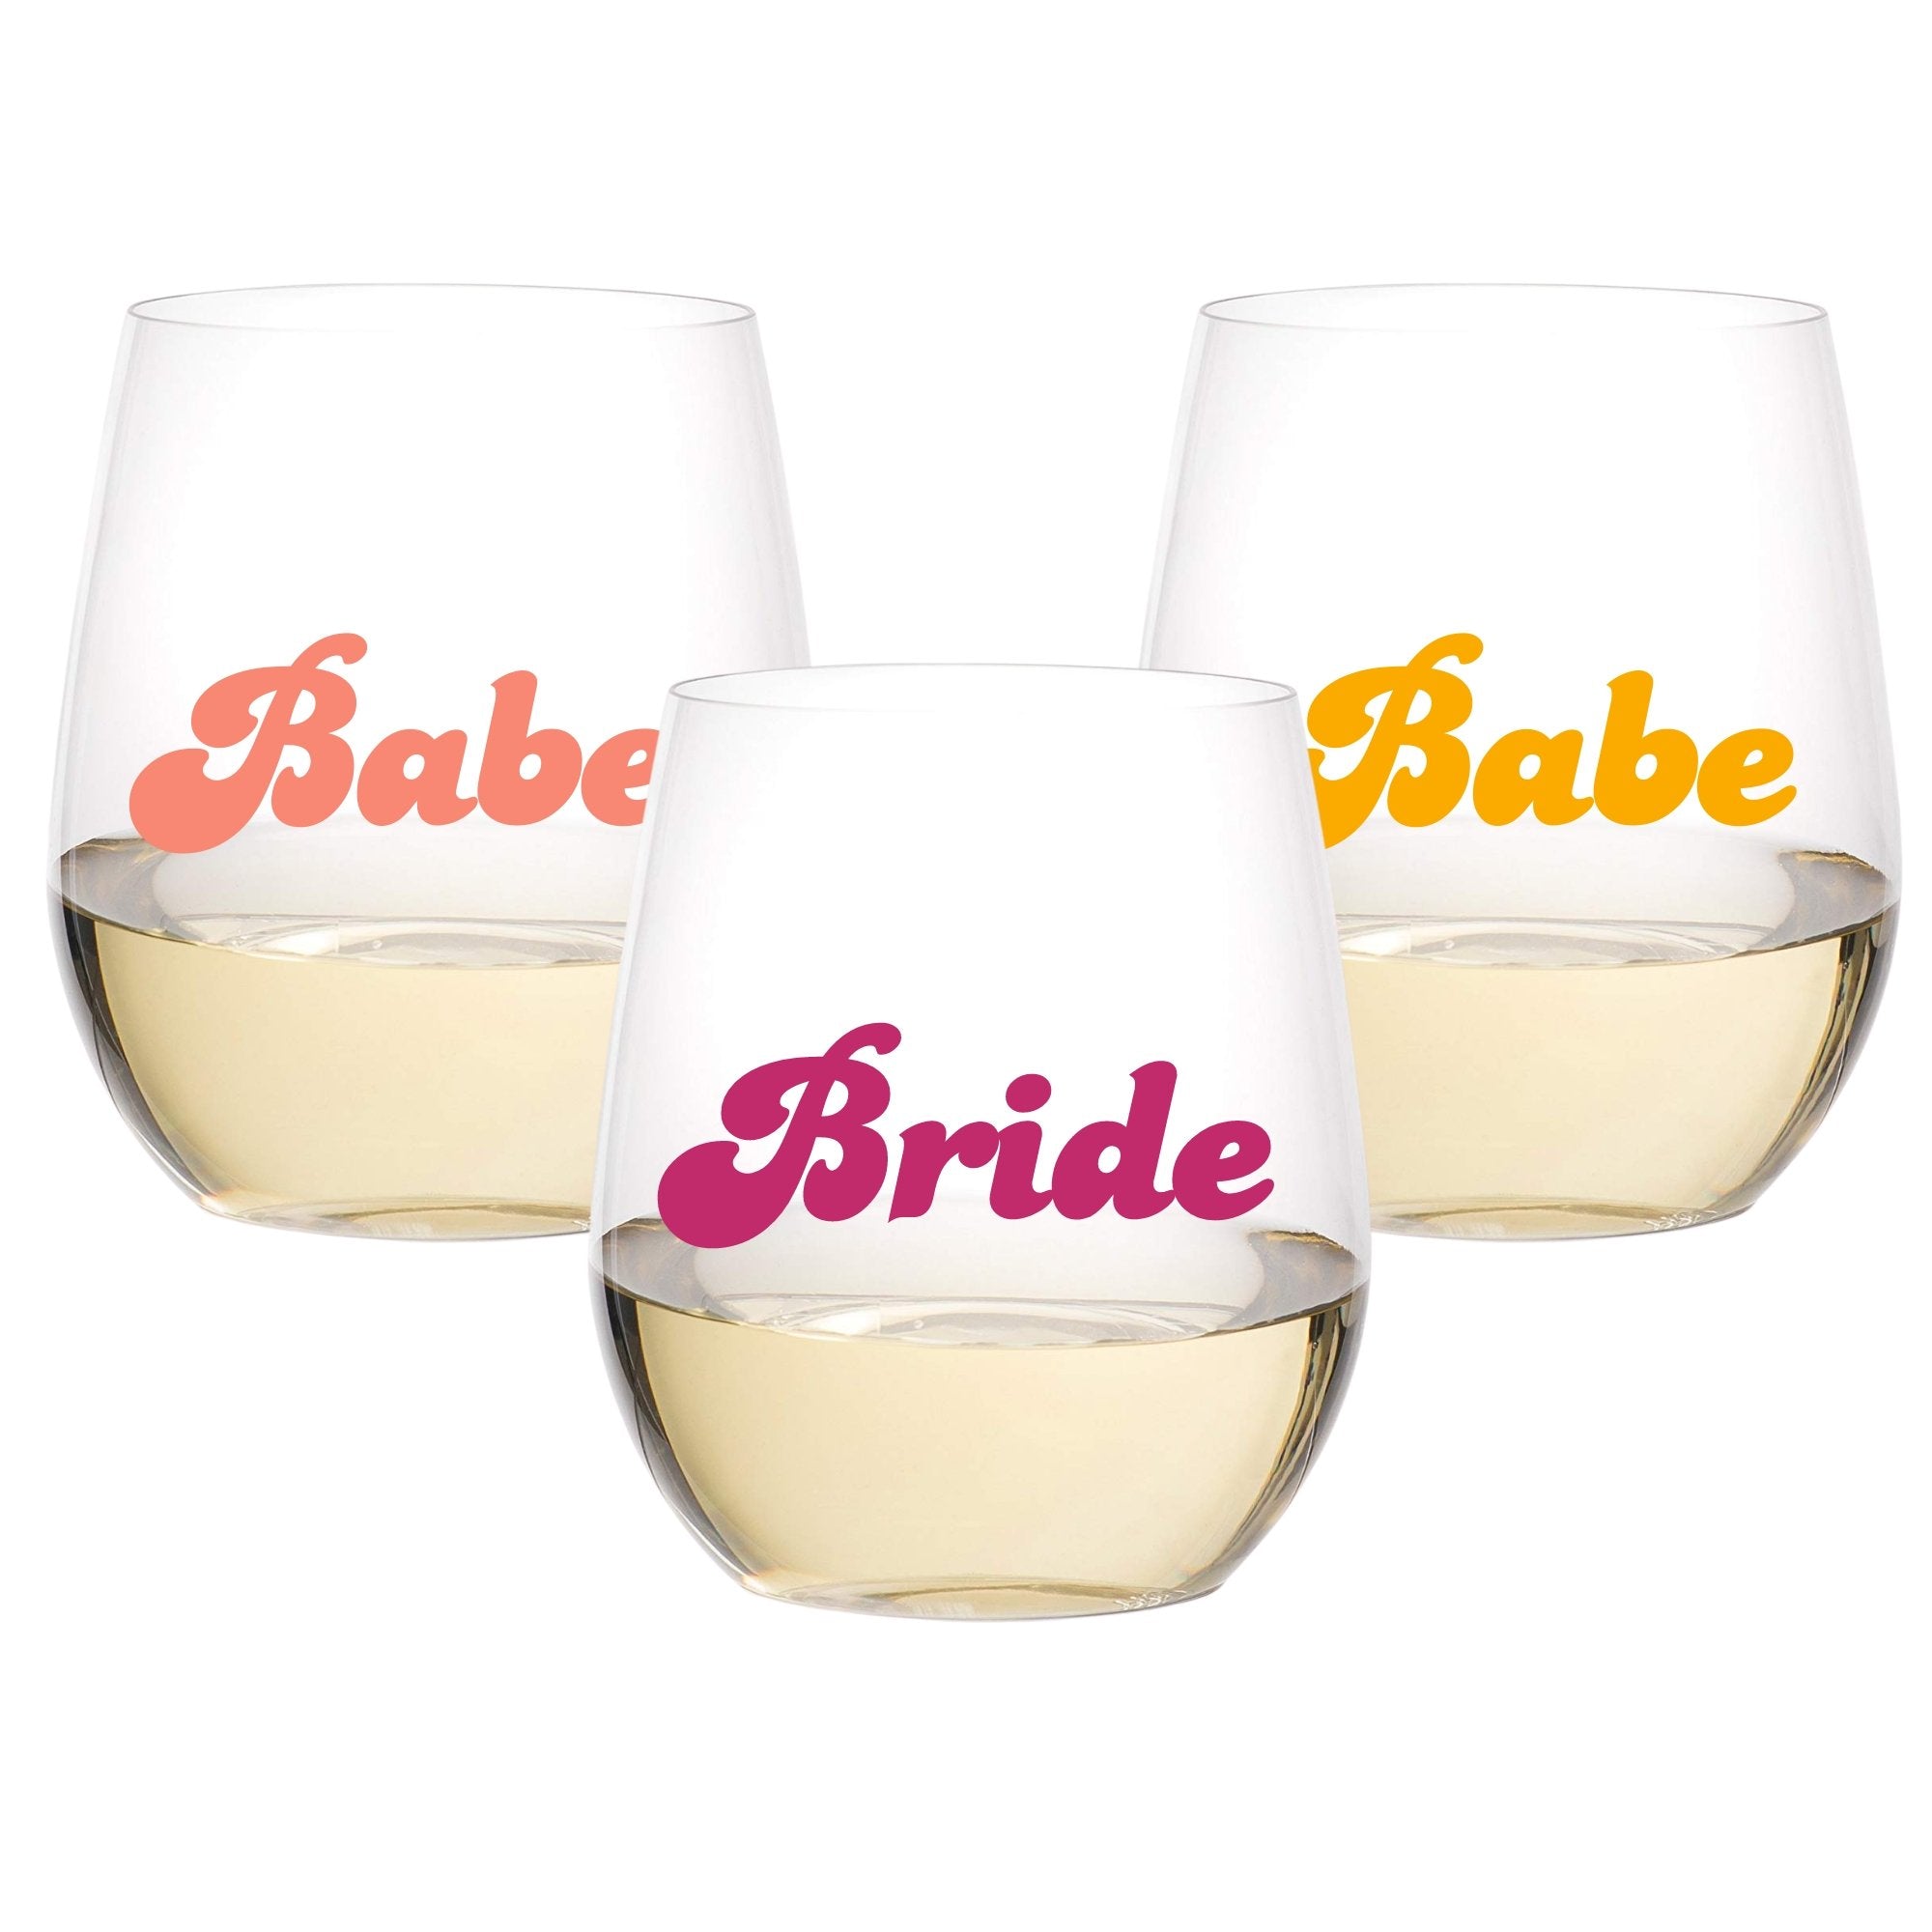 An acrylic wine glass reads "Bride" on the front in retro font